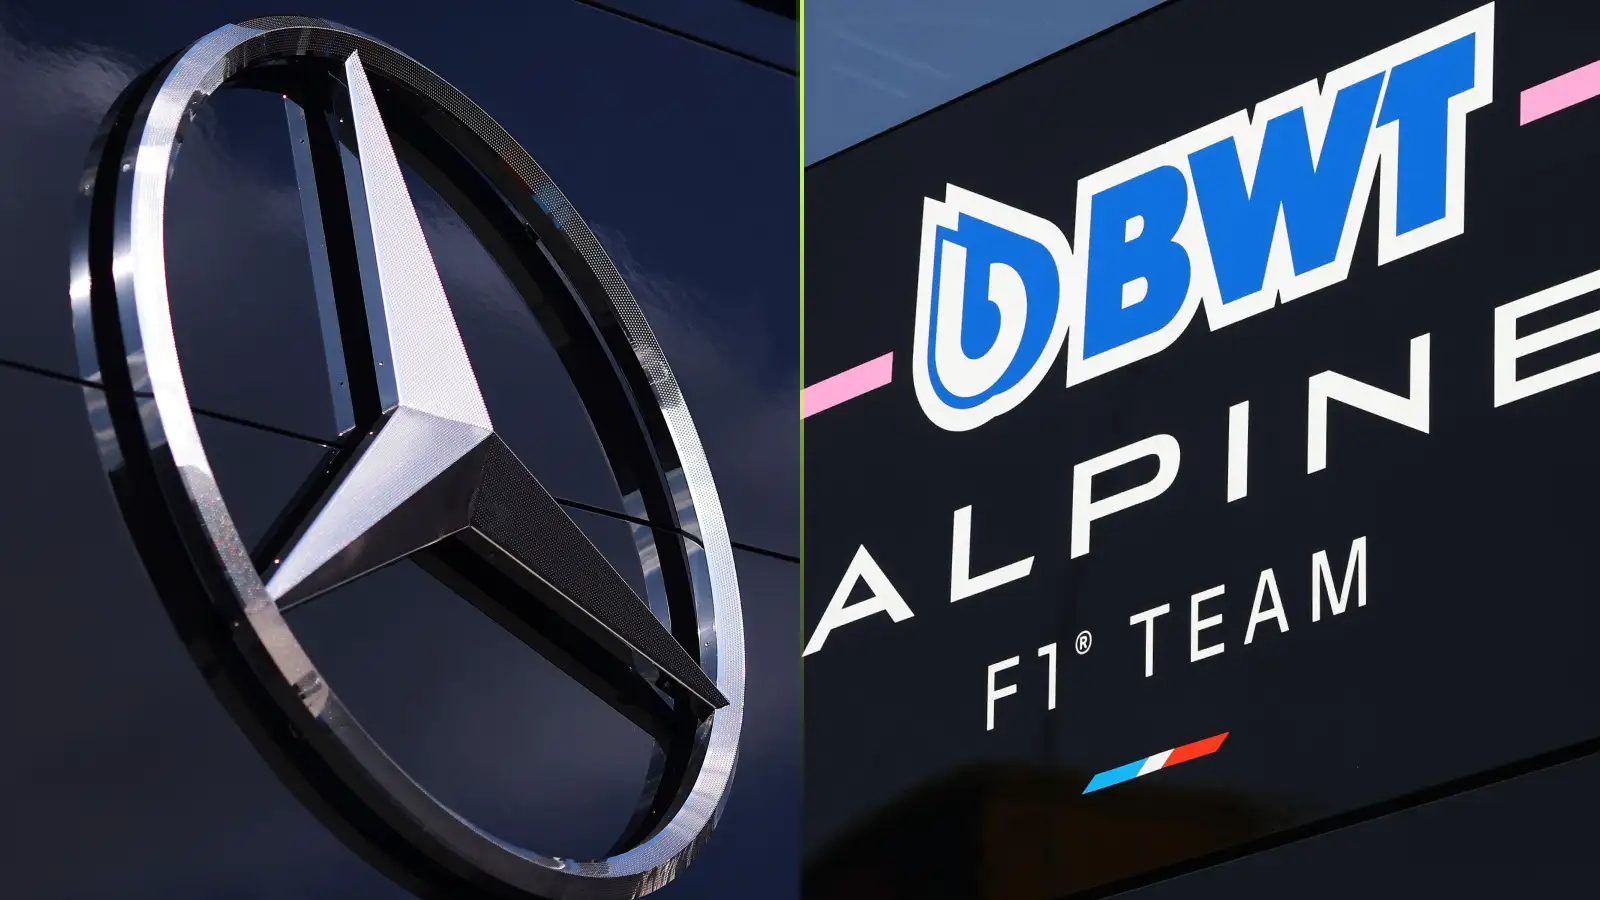 The Mercedes and Alpine logo.